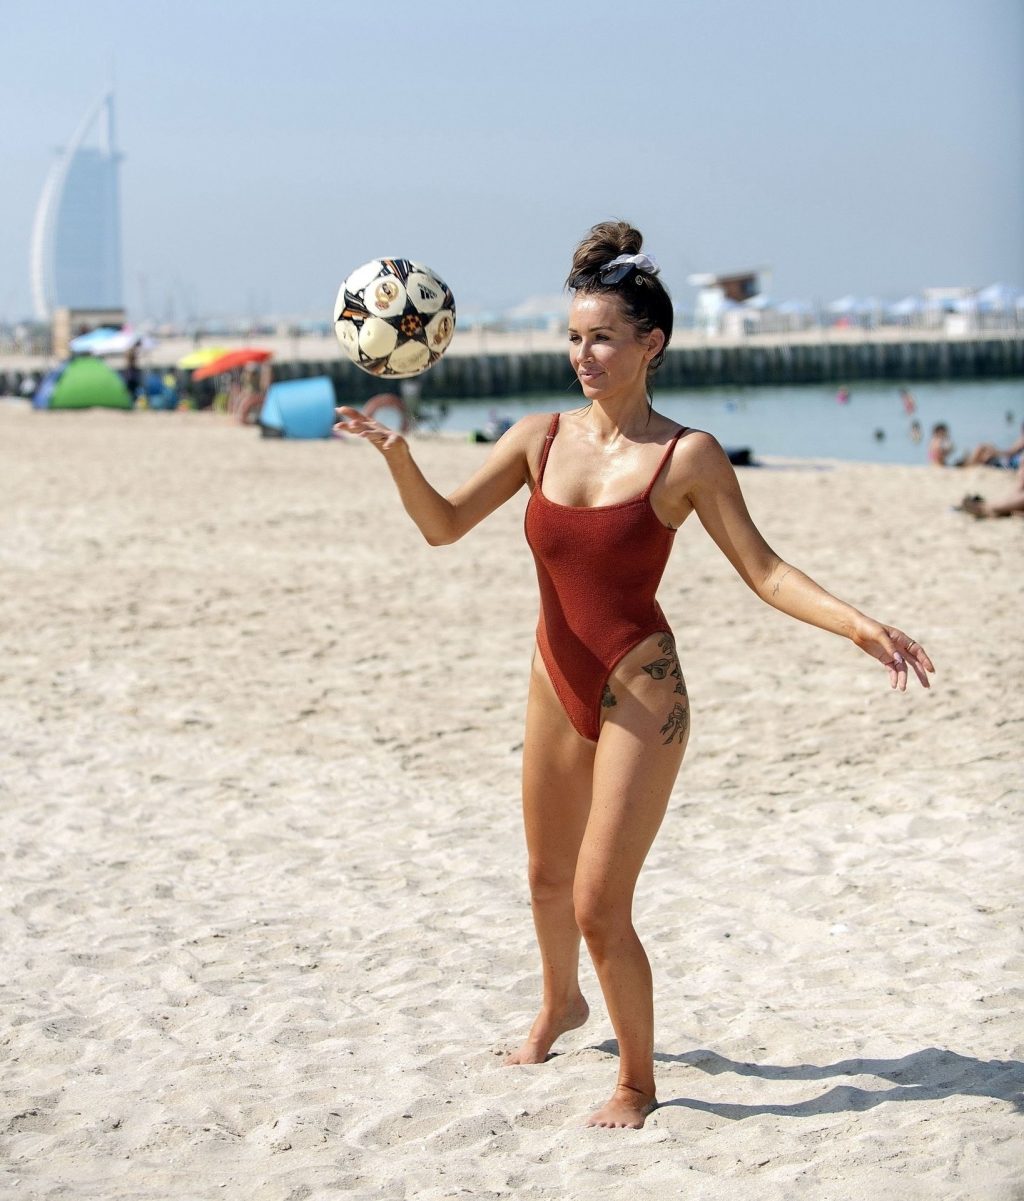 Laura Anderson Shows Off Her Ball Skills on the Beach in Dubai (14 Photos)